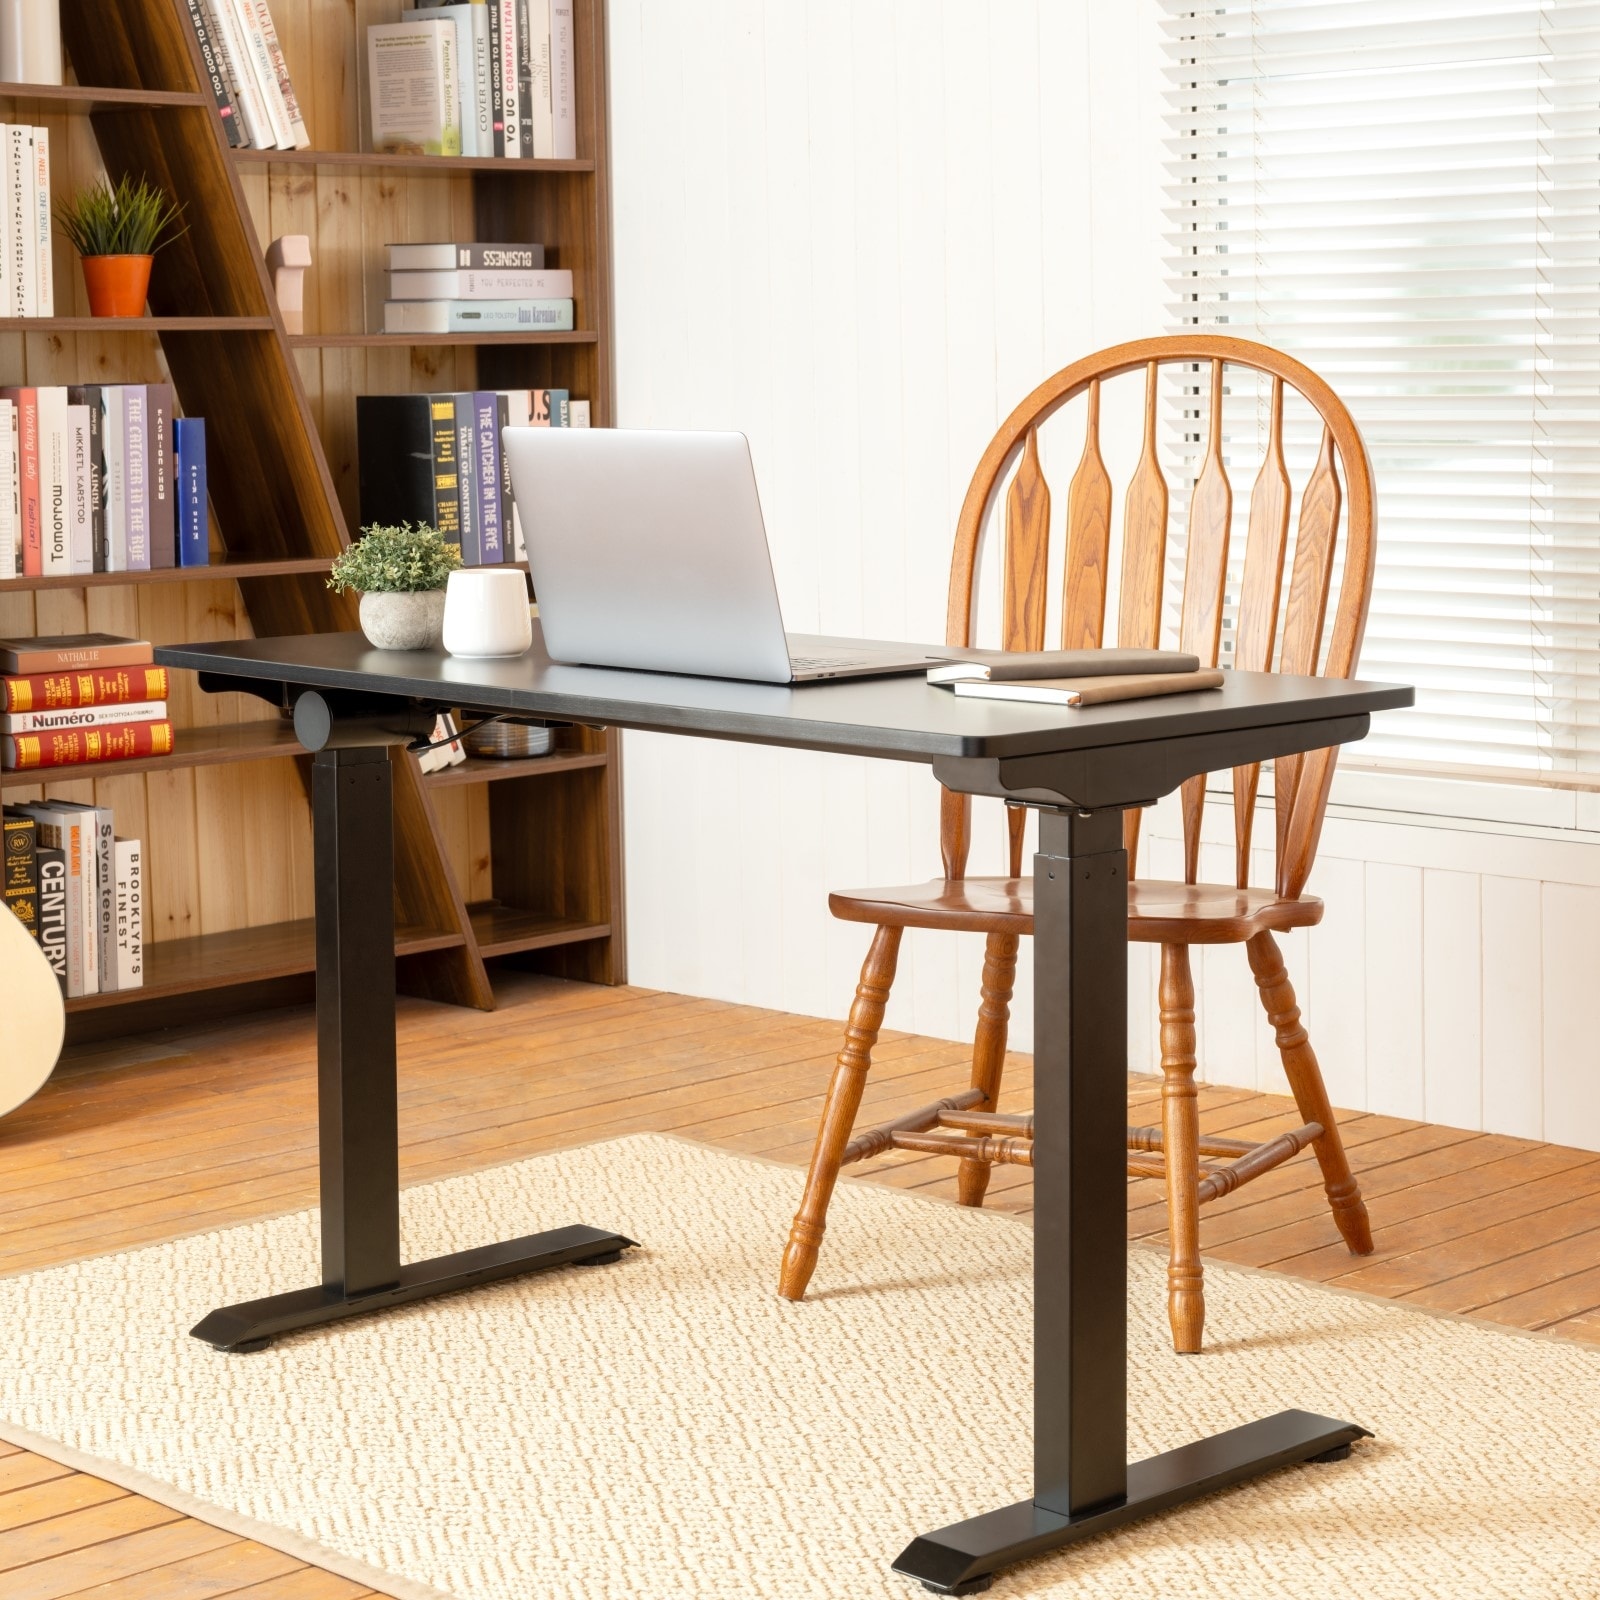 FLEXISPOT Height Adjustable Desk 40 x 24 Inches Small Desk Whole-Piece Desk  Board Electric Sit Stand Desk Home Office Table Standing Desk (Classic